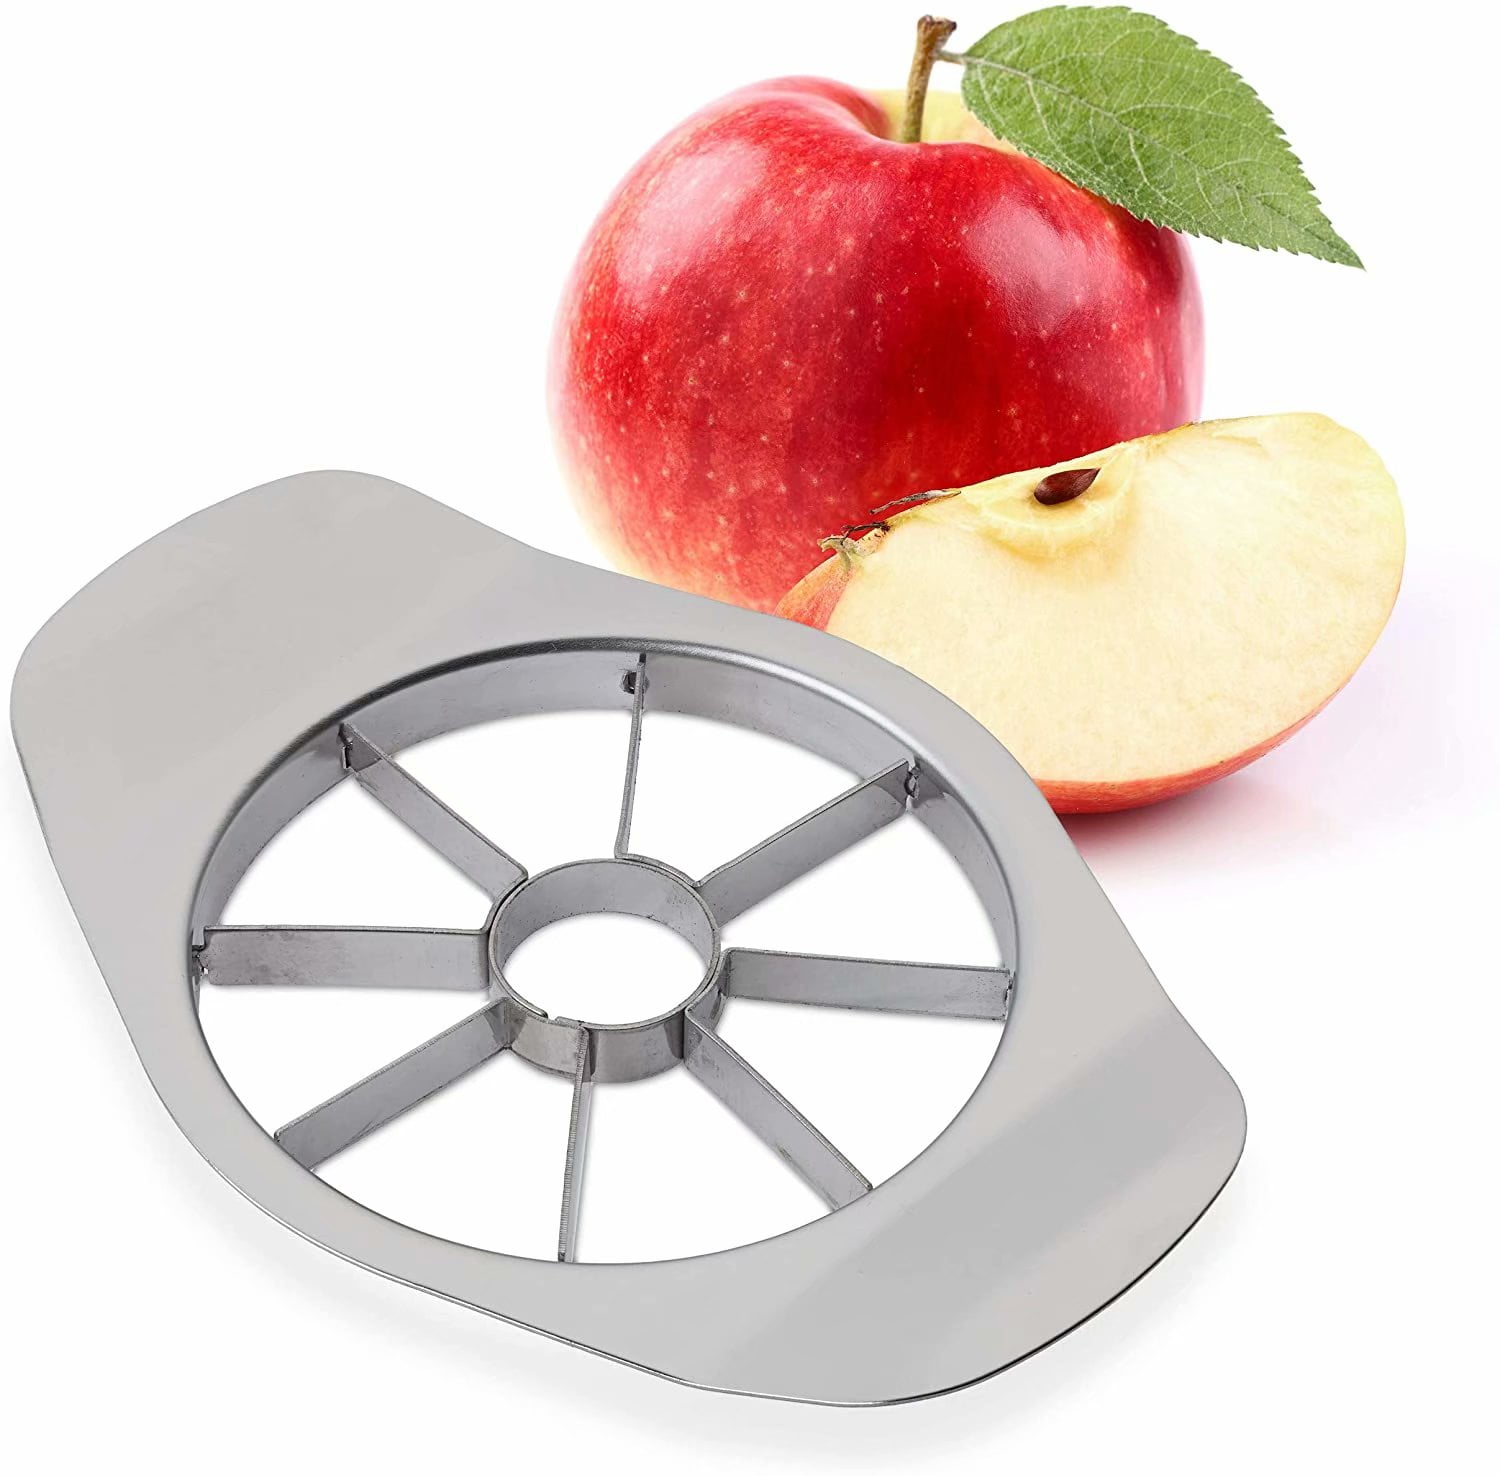 Apple Slicer with Stainless Steel Blades Eamplest Apple Slicer Apple Slicer Divides into 8 Same Pieces and Corers for Apple and Pears Apple Splitter 